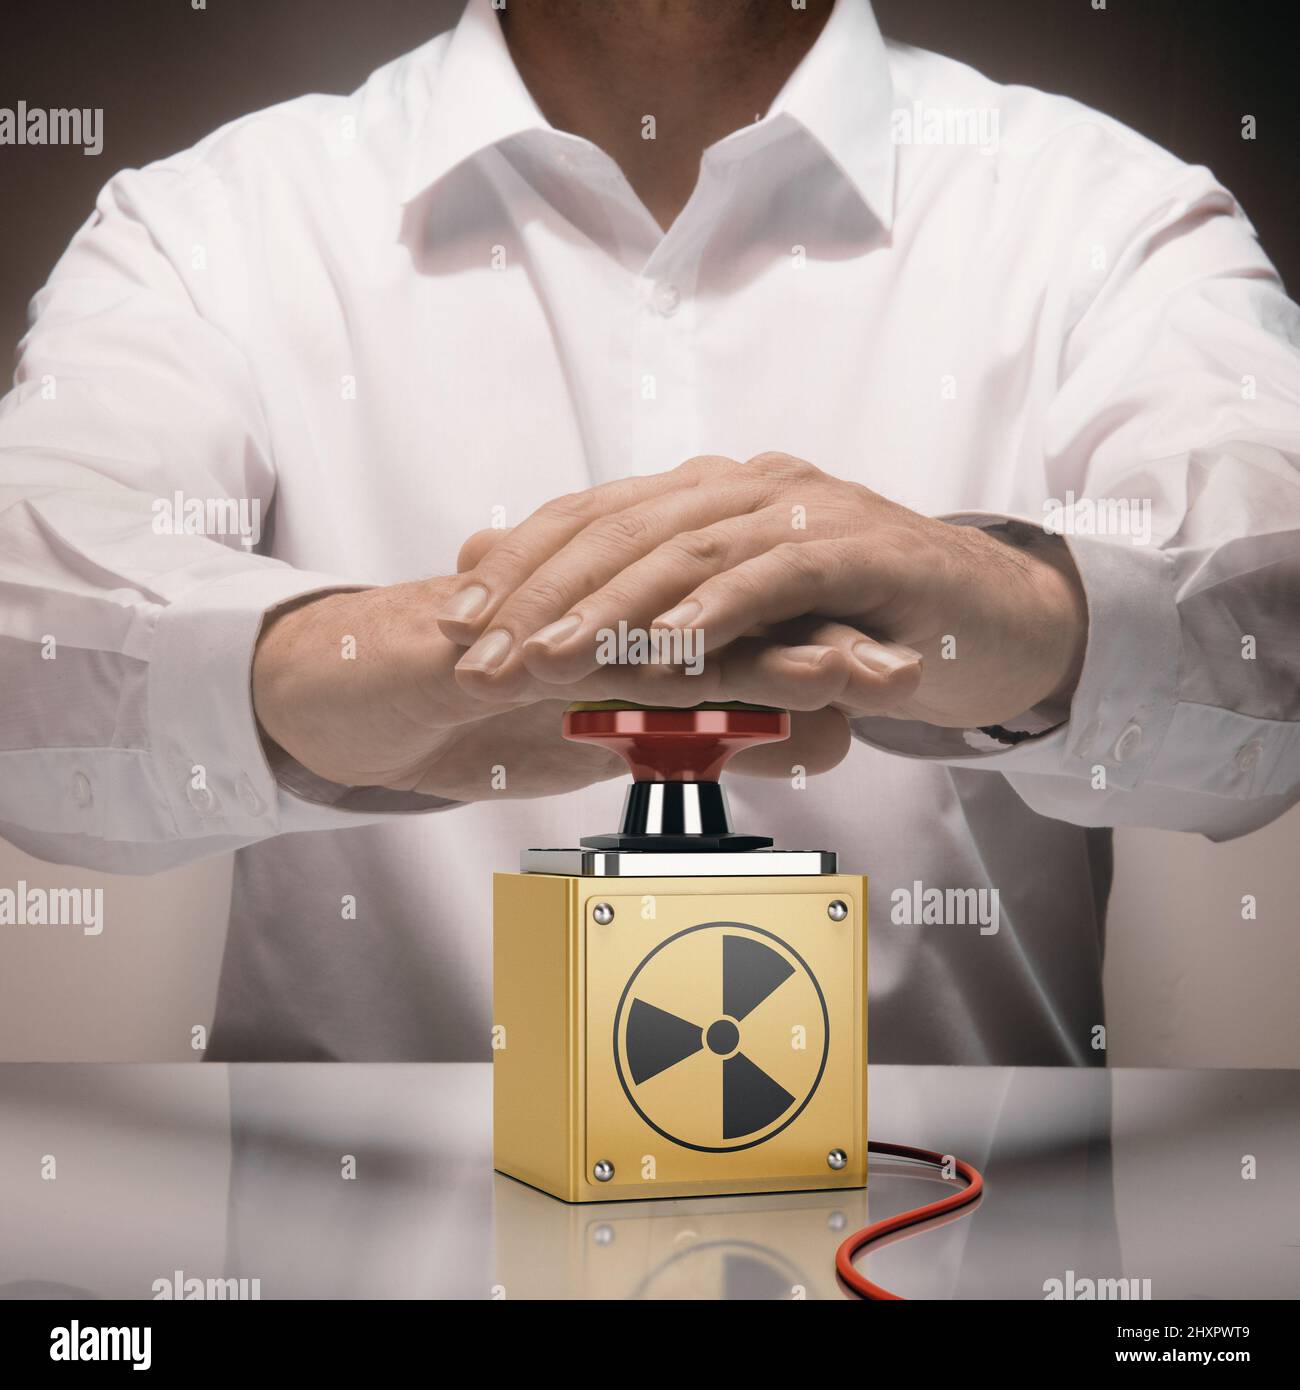 Man pushing a nuke button. Concept of nuclear war. Composite image between a hand photography and a 3D background. Stock Photo